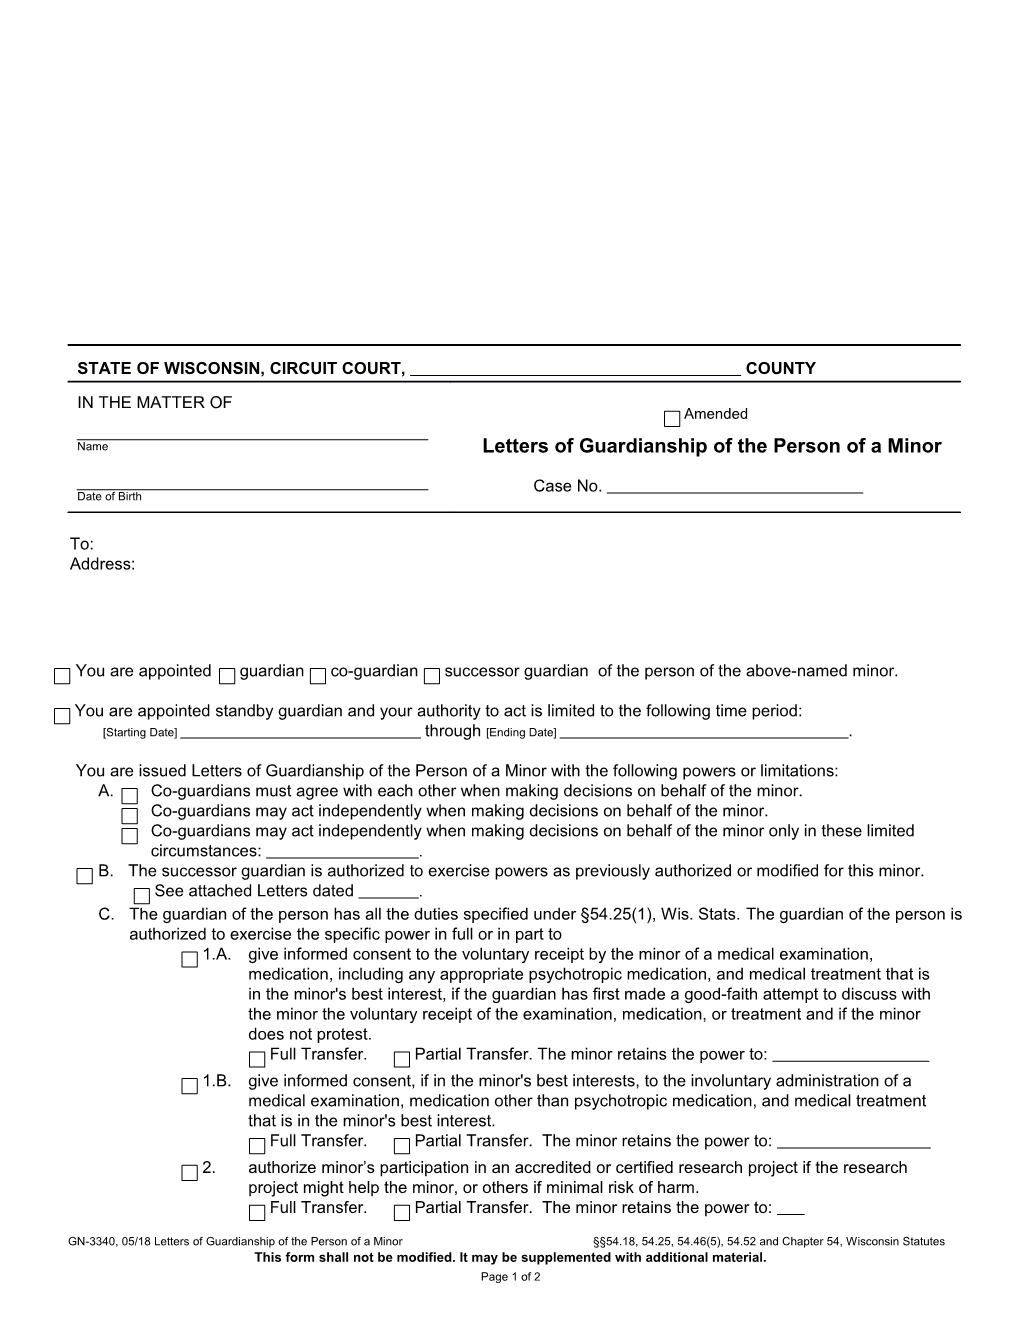 GN-3340: Letters of Guardianship of the Person of a Minor